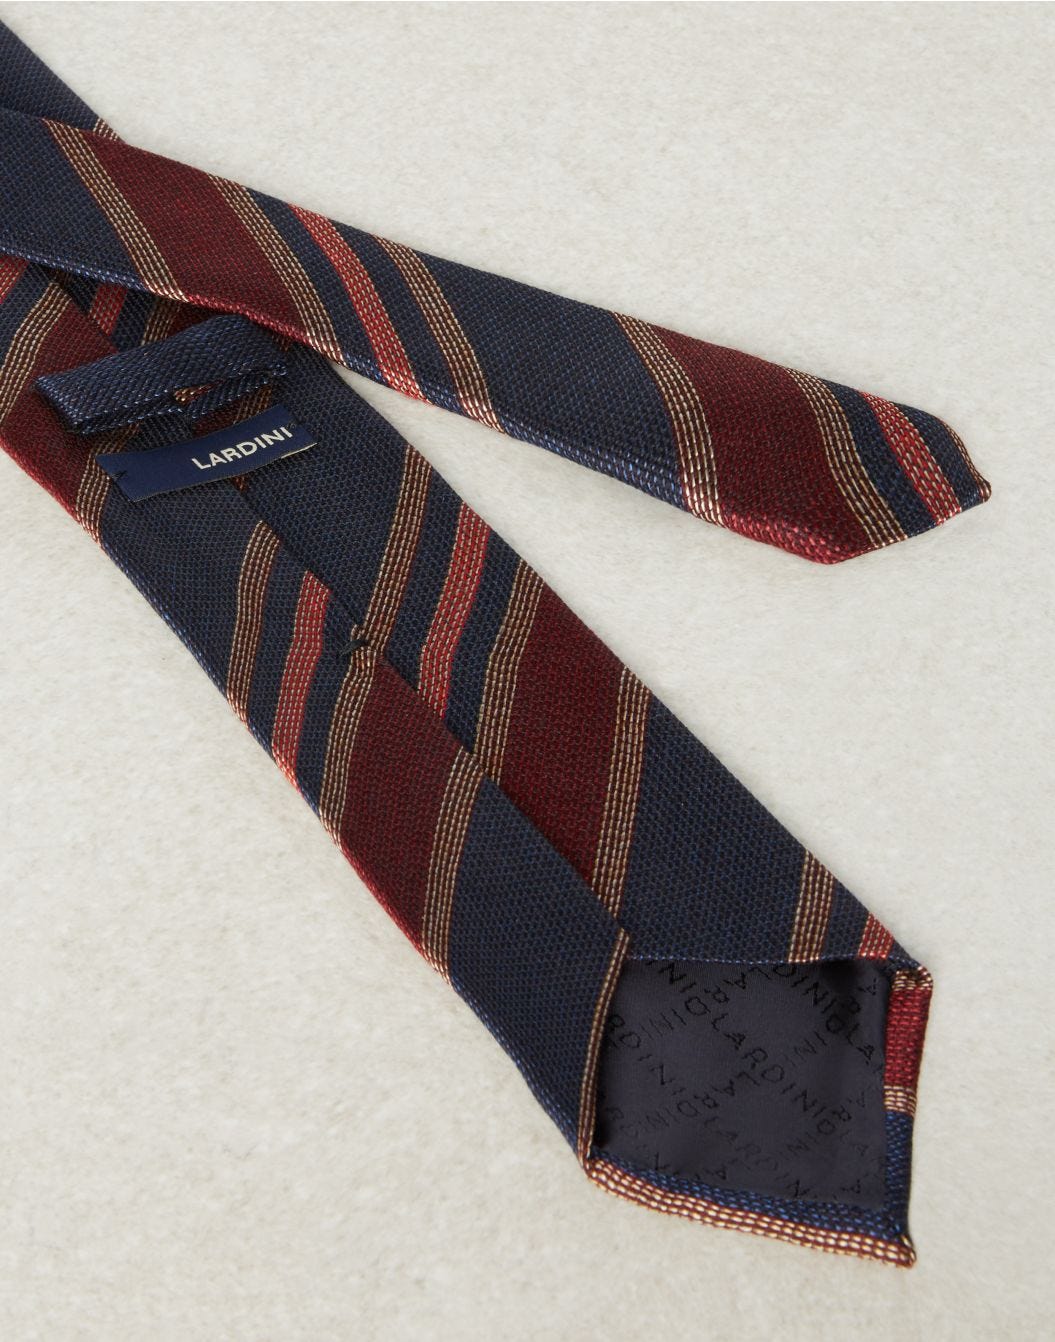 Classic regimental tie in a blue, red and beige colourway